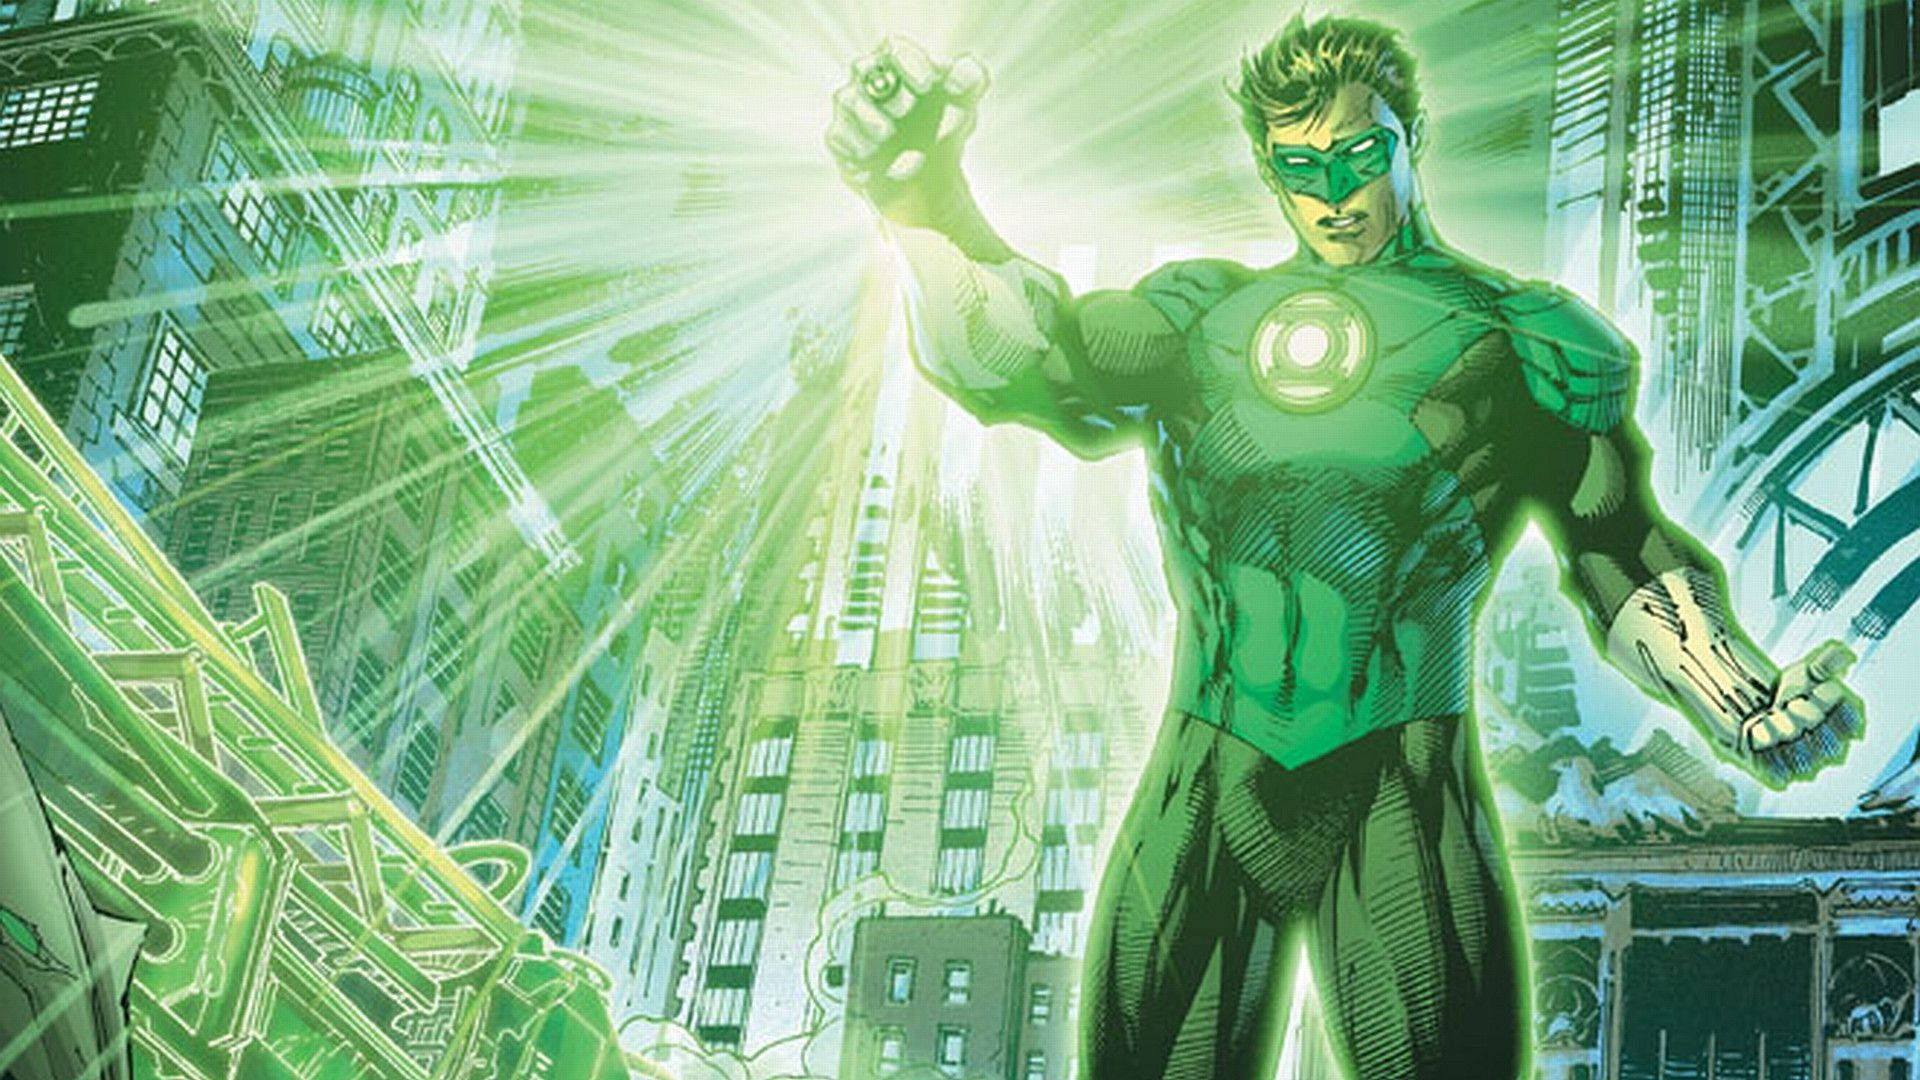 Green Lantern In The City Background